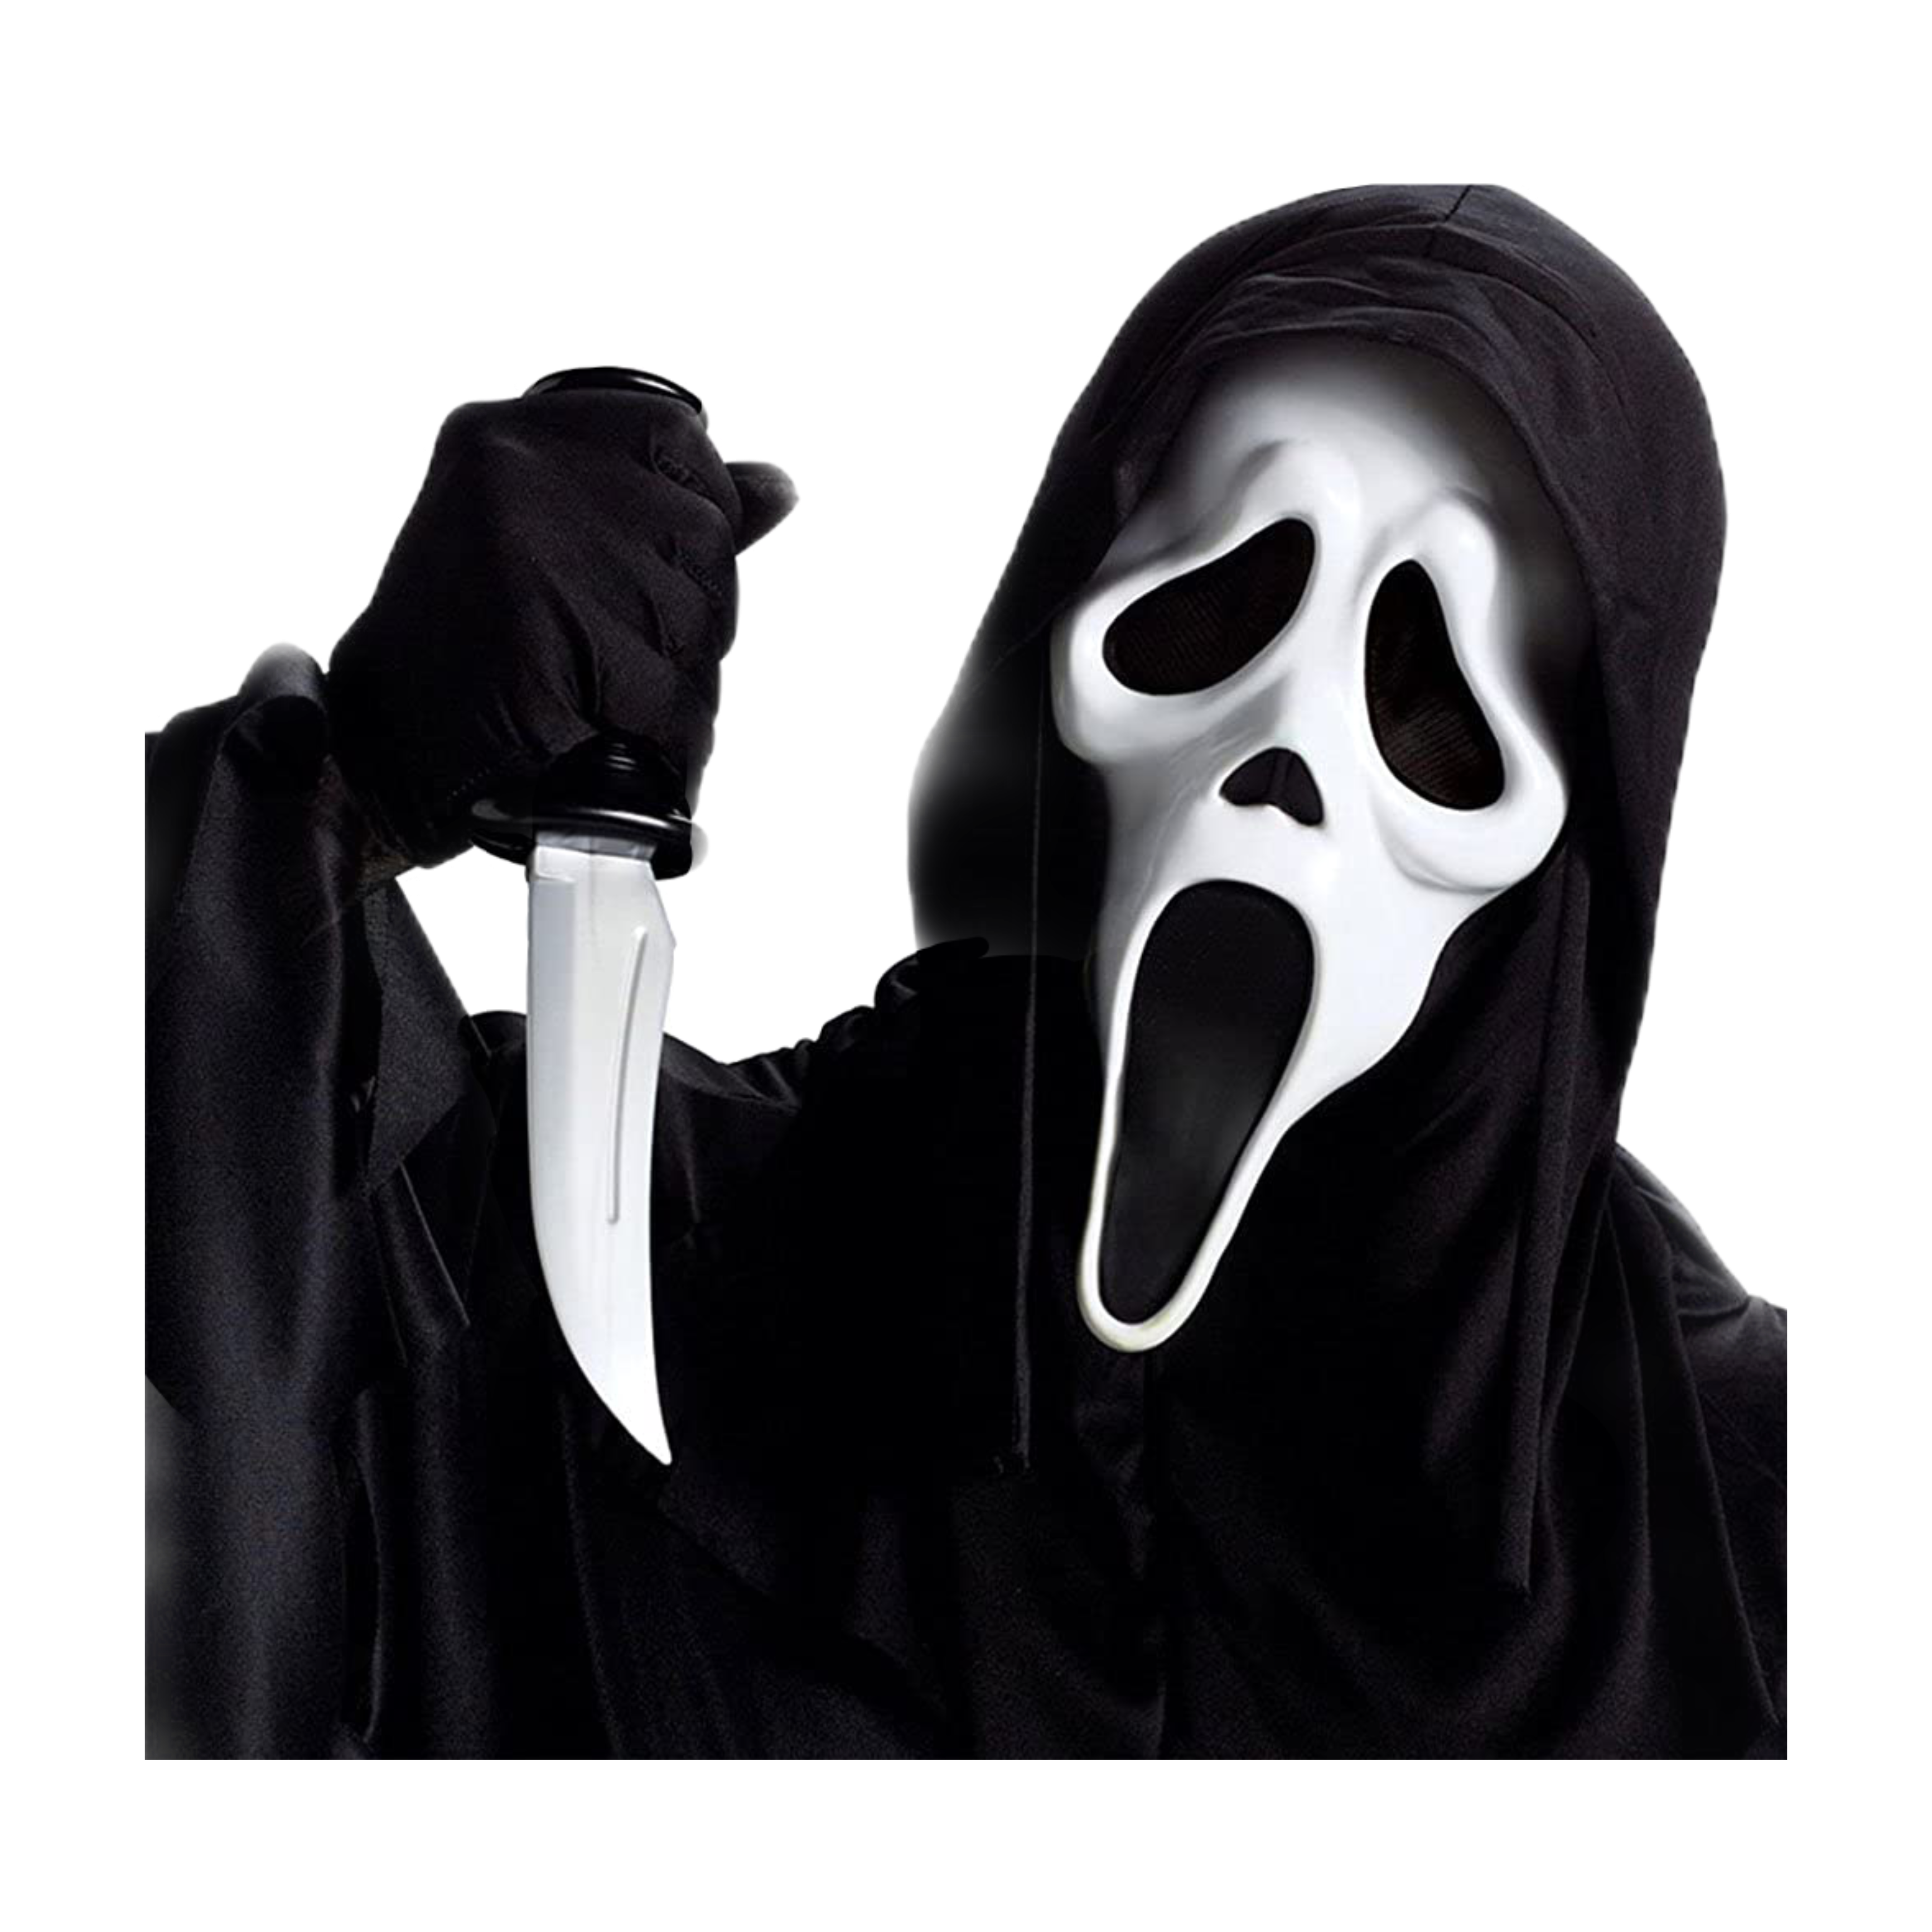 This visual is about ghostface freetoedit Kilt #ghostface.